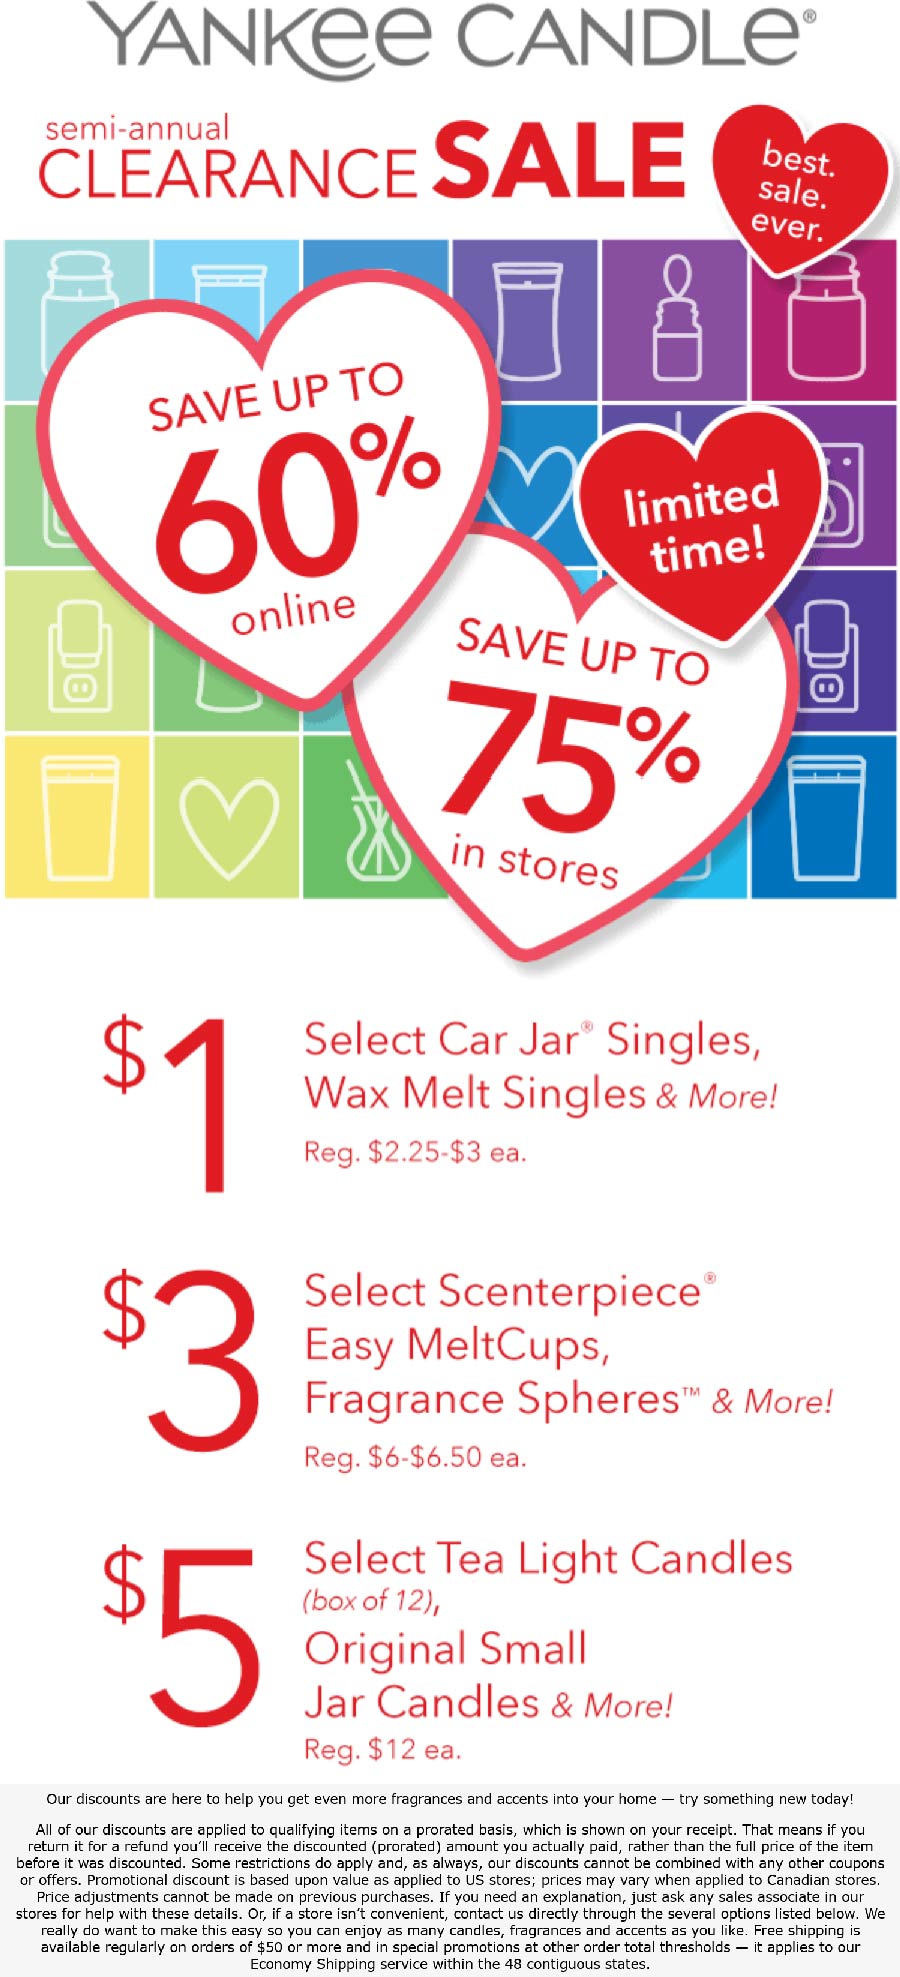 Yankee Candle stores Coupon  $5 small candles & more at Yankee Candle #yankeecandle 